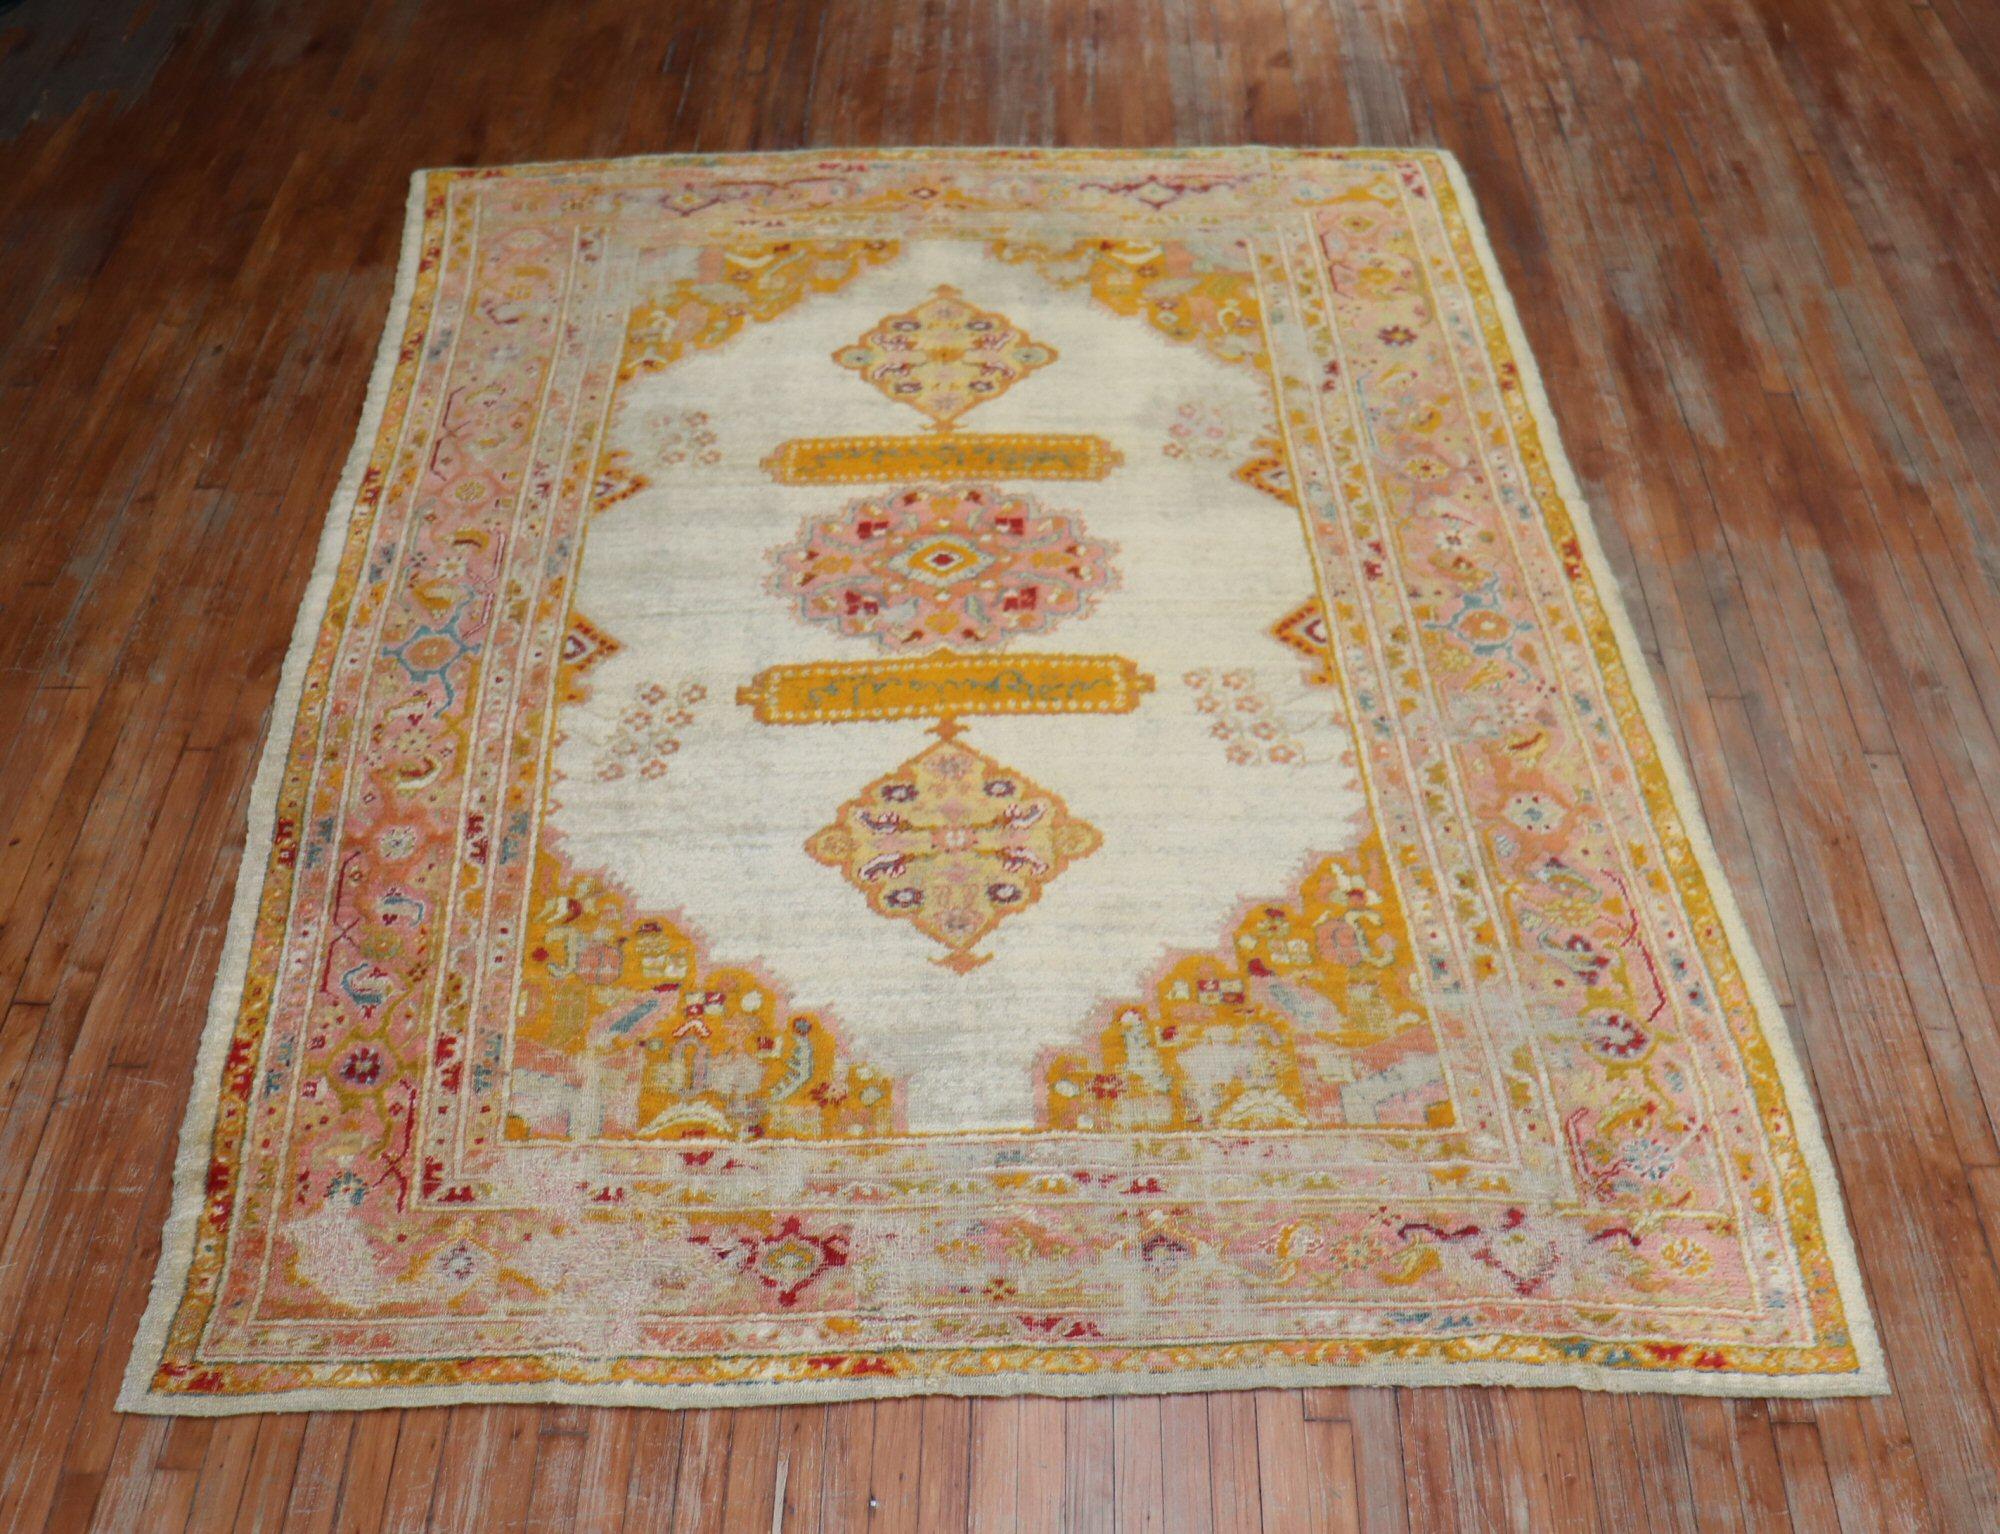 Late 19th century shabby chic Angora Oushak rug with saturated colors, on an ivory field.

Measures: 7'4” x 10'

Oushak rugs are prized for their rich looks as well as for their high quality and exceptional beauty, which makes them excellent